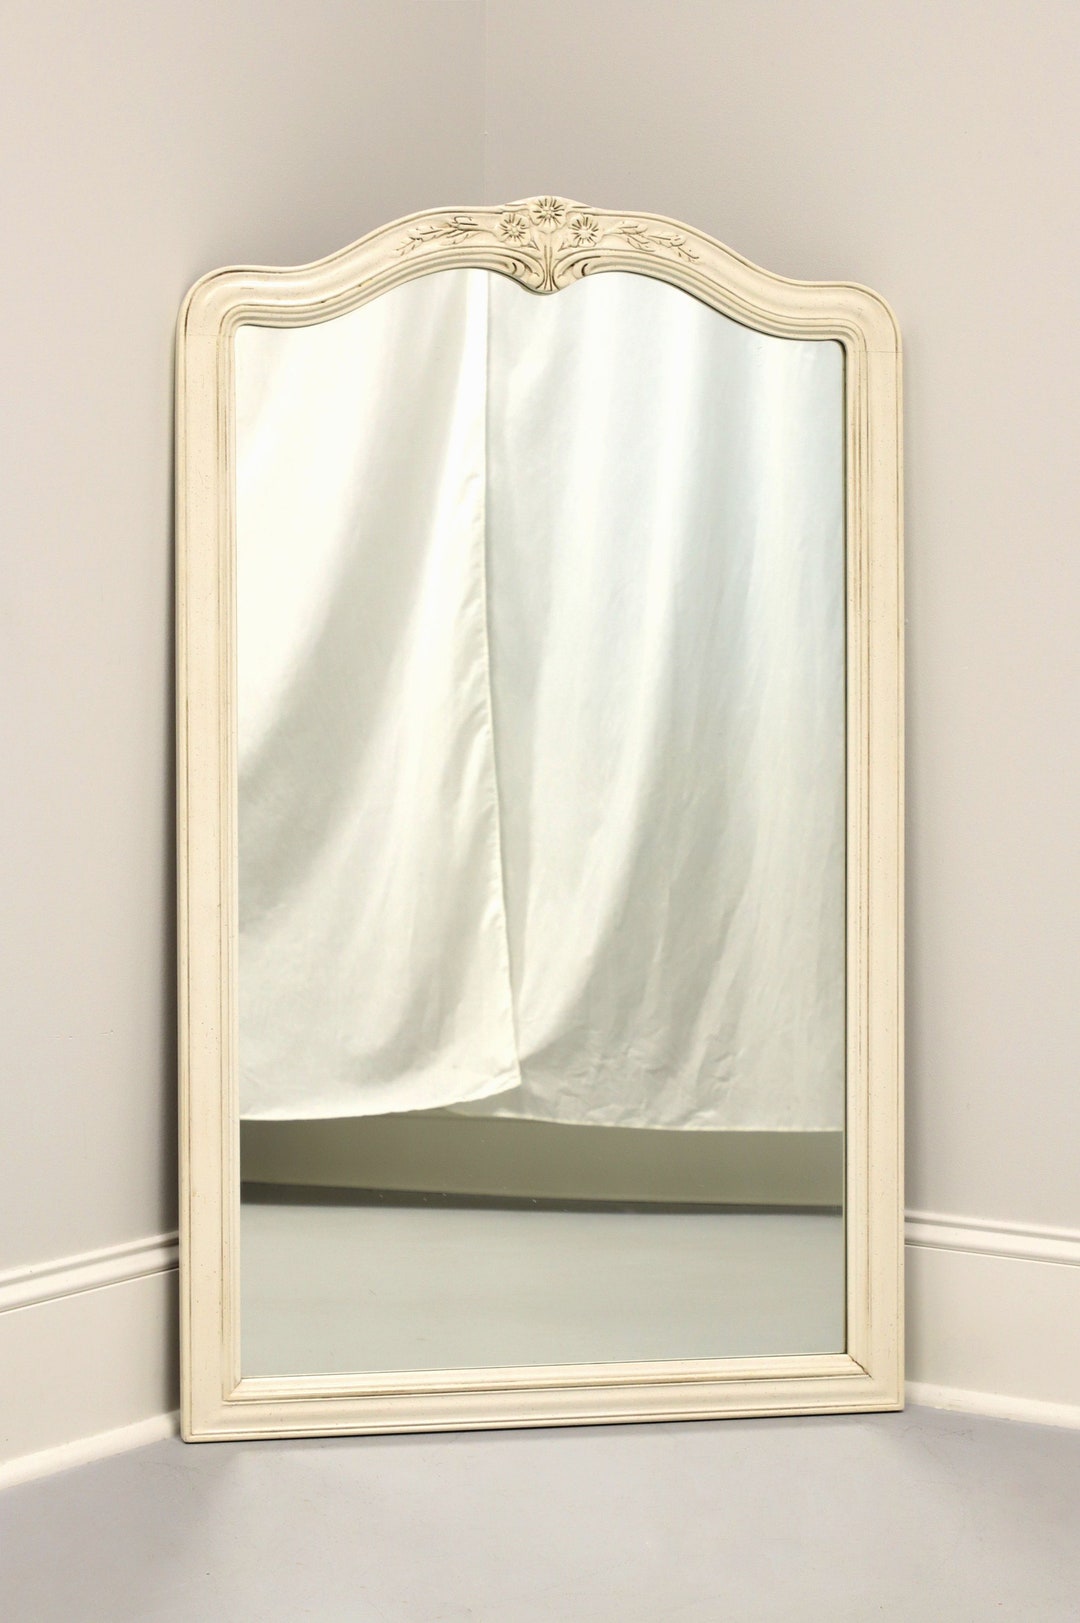 HENREDON French Provincial Painted Wall Mirror - Etsy 日本